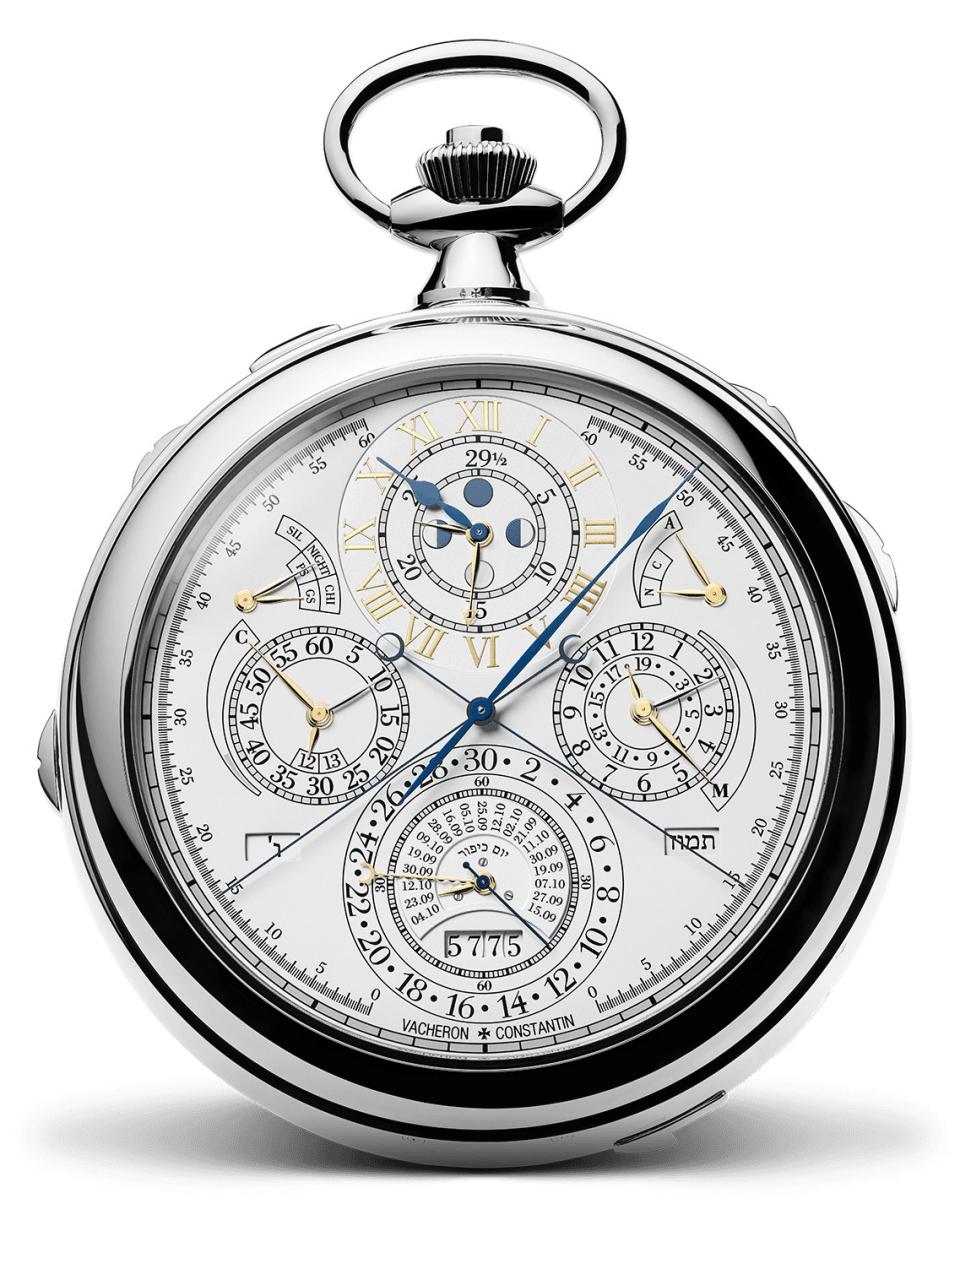 Vacheron Constantin says this watch, released in 2015 with 57 complications, is the most complicated in the world